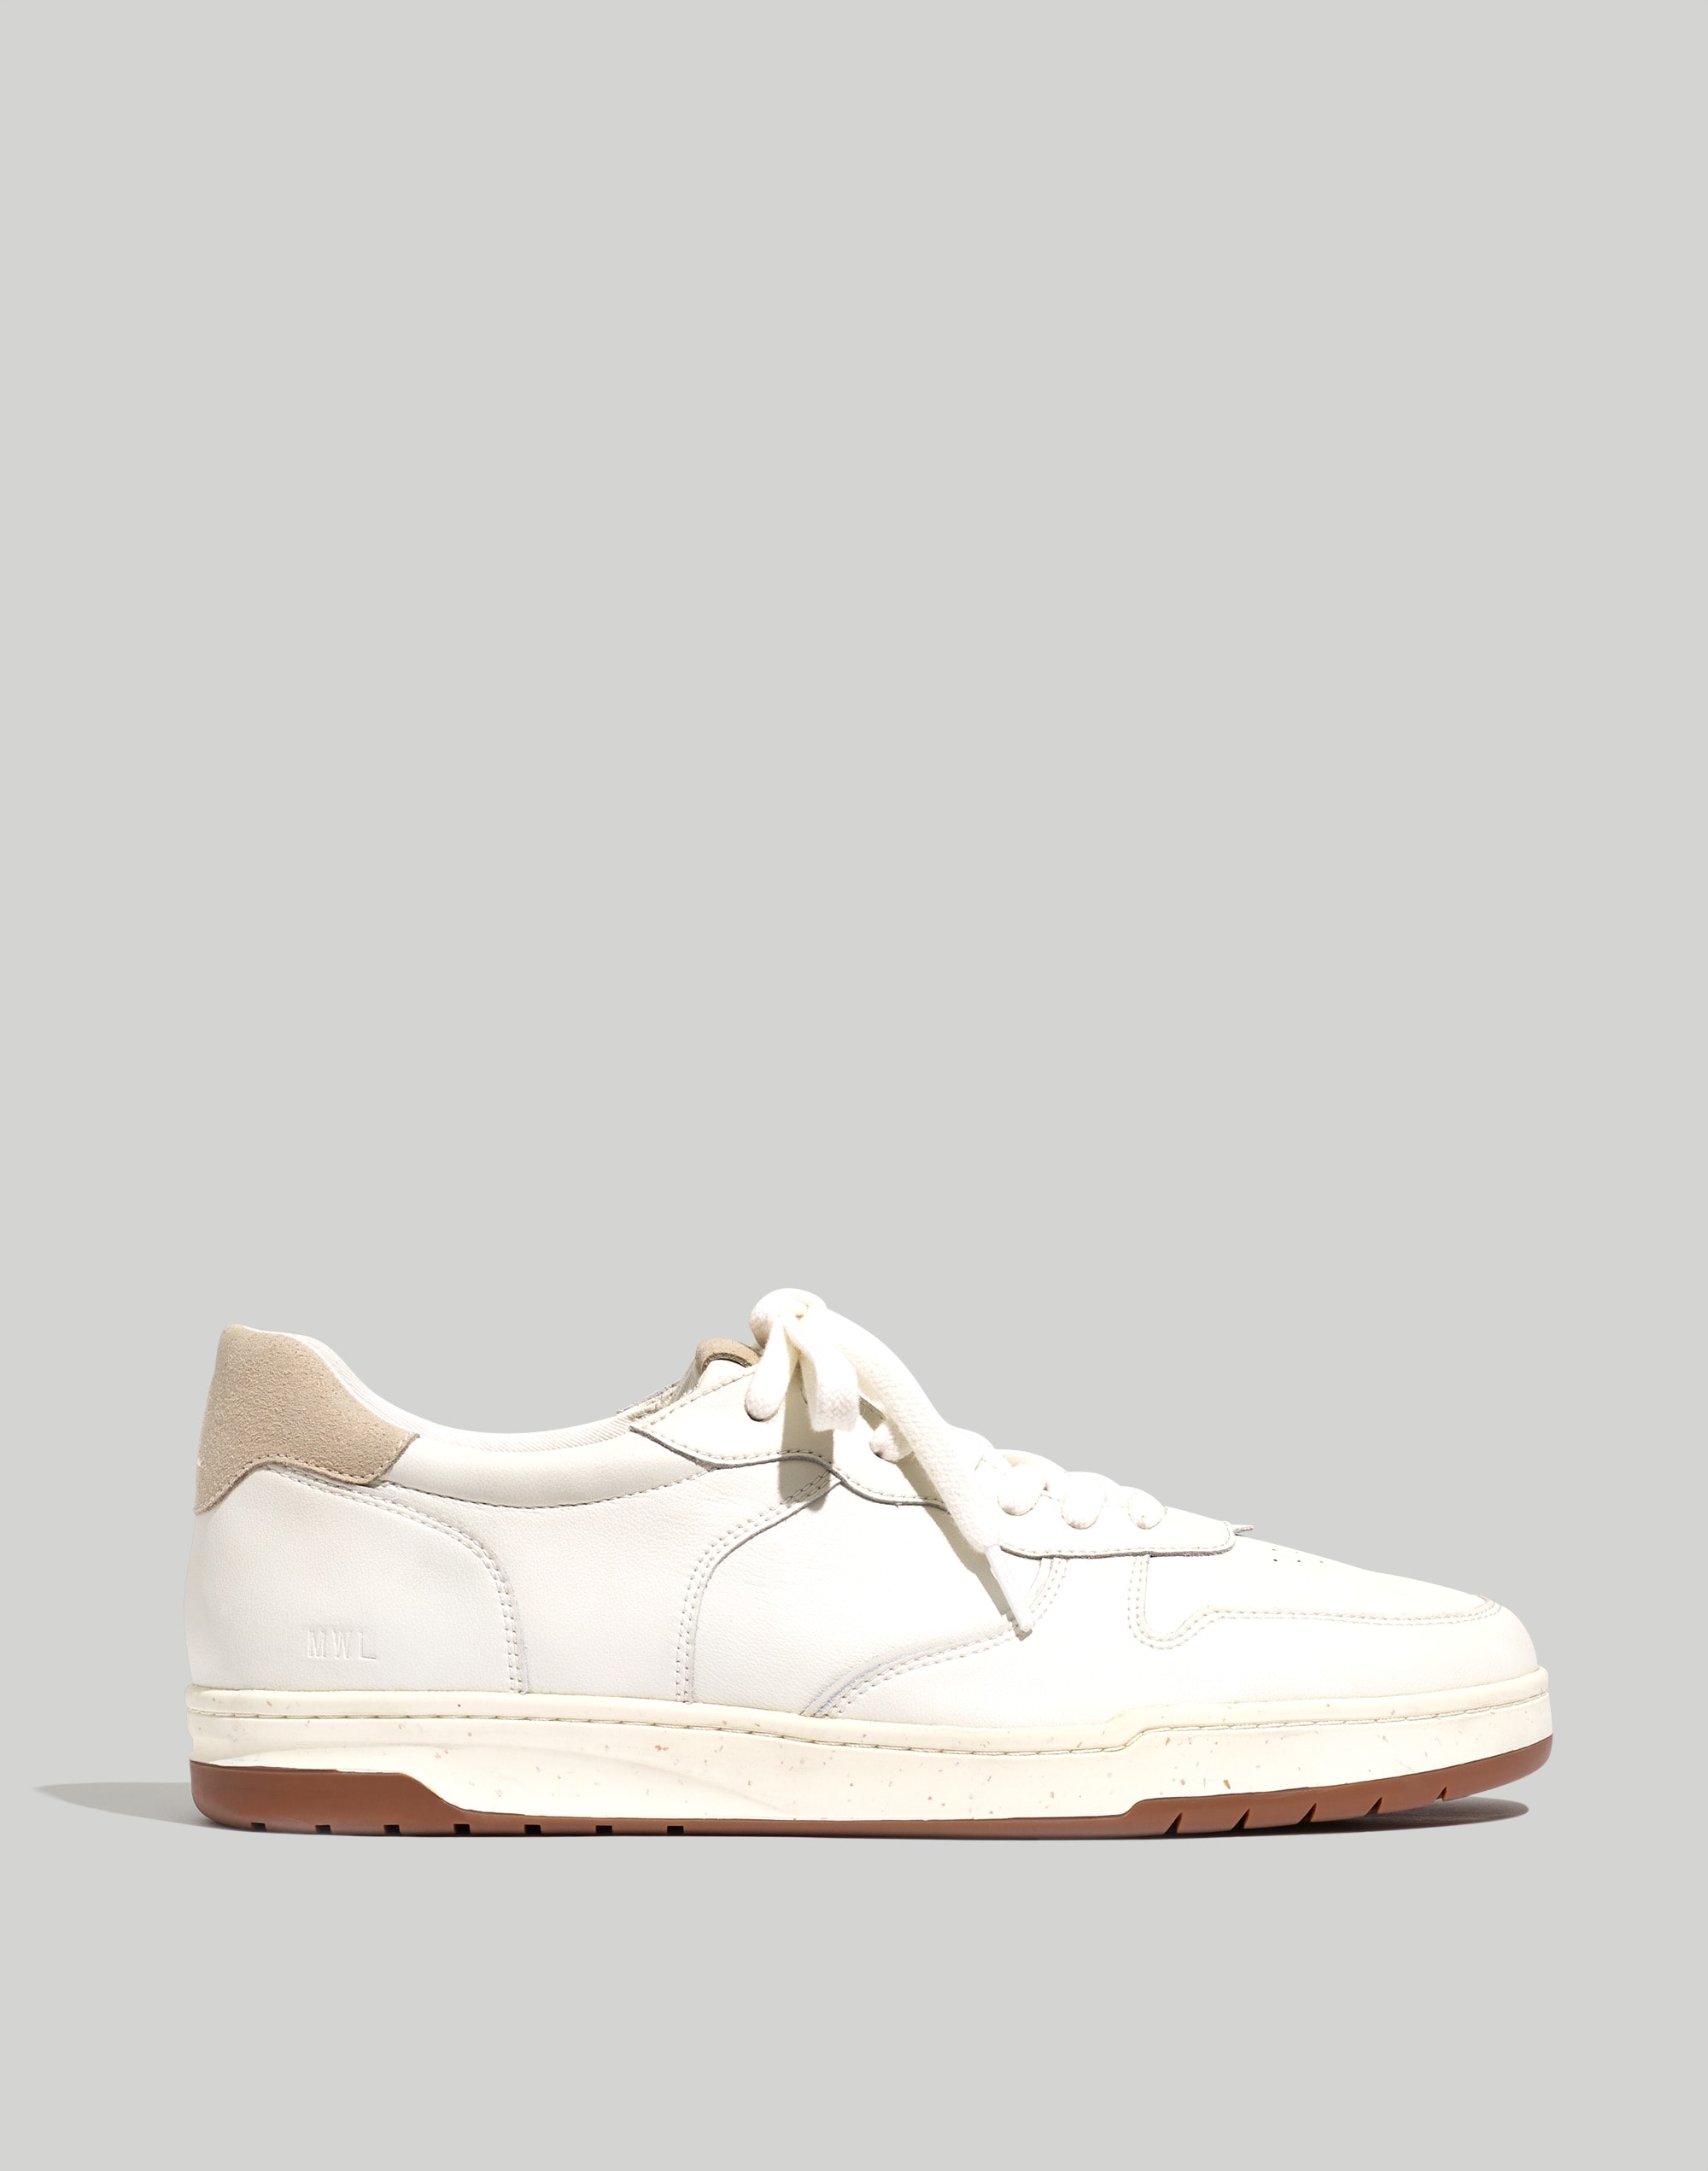 Court Sneakers Colorblock Leather and Suede